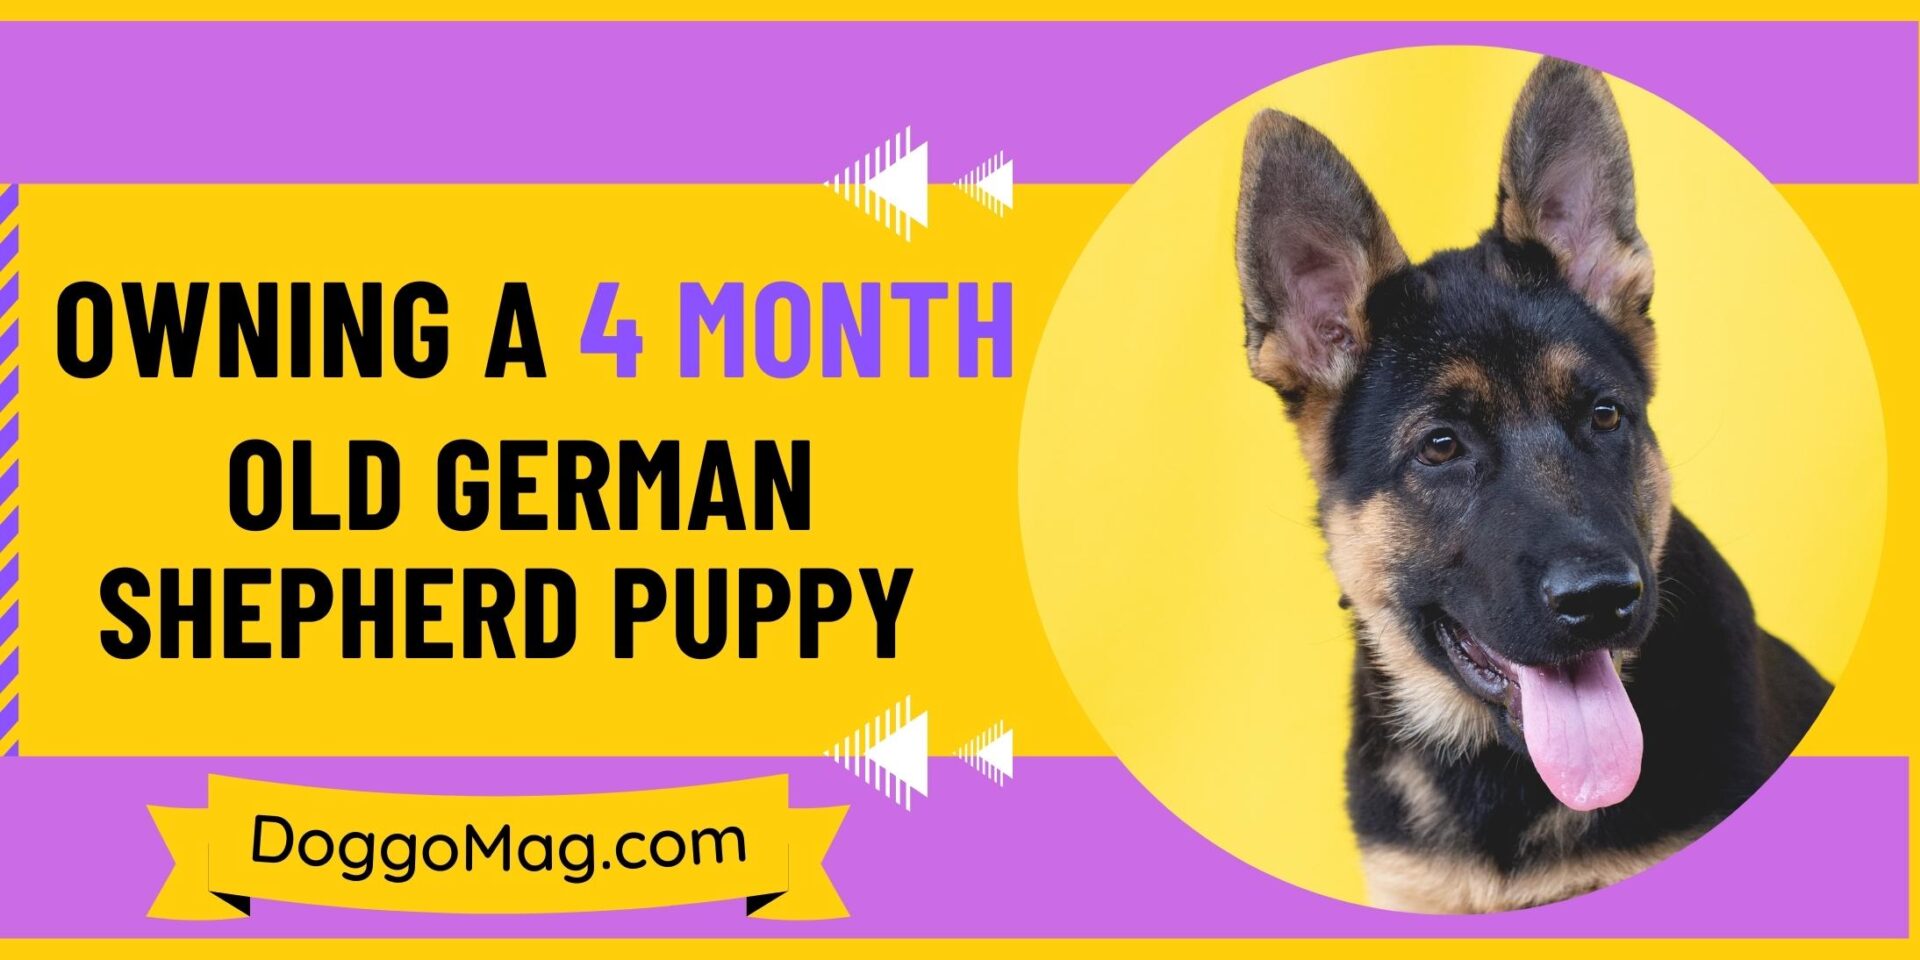 Owning A 4 Month Old German Shepherd Puppy 101 - DoggoMag